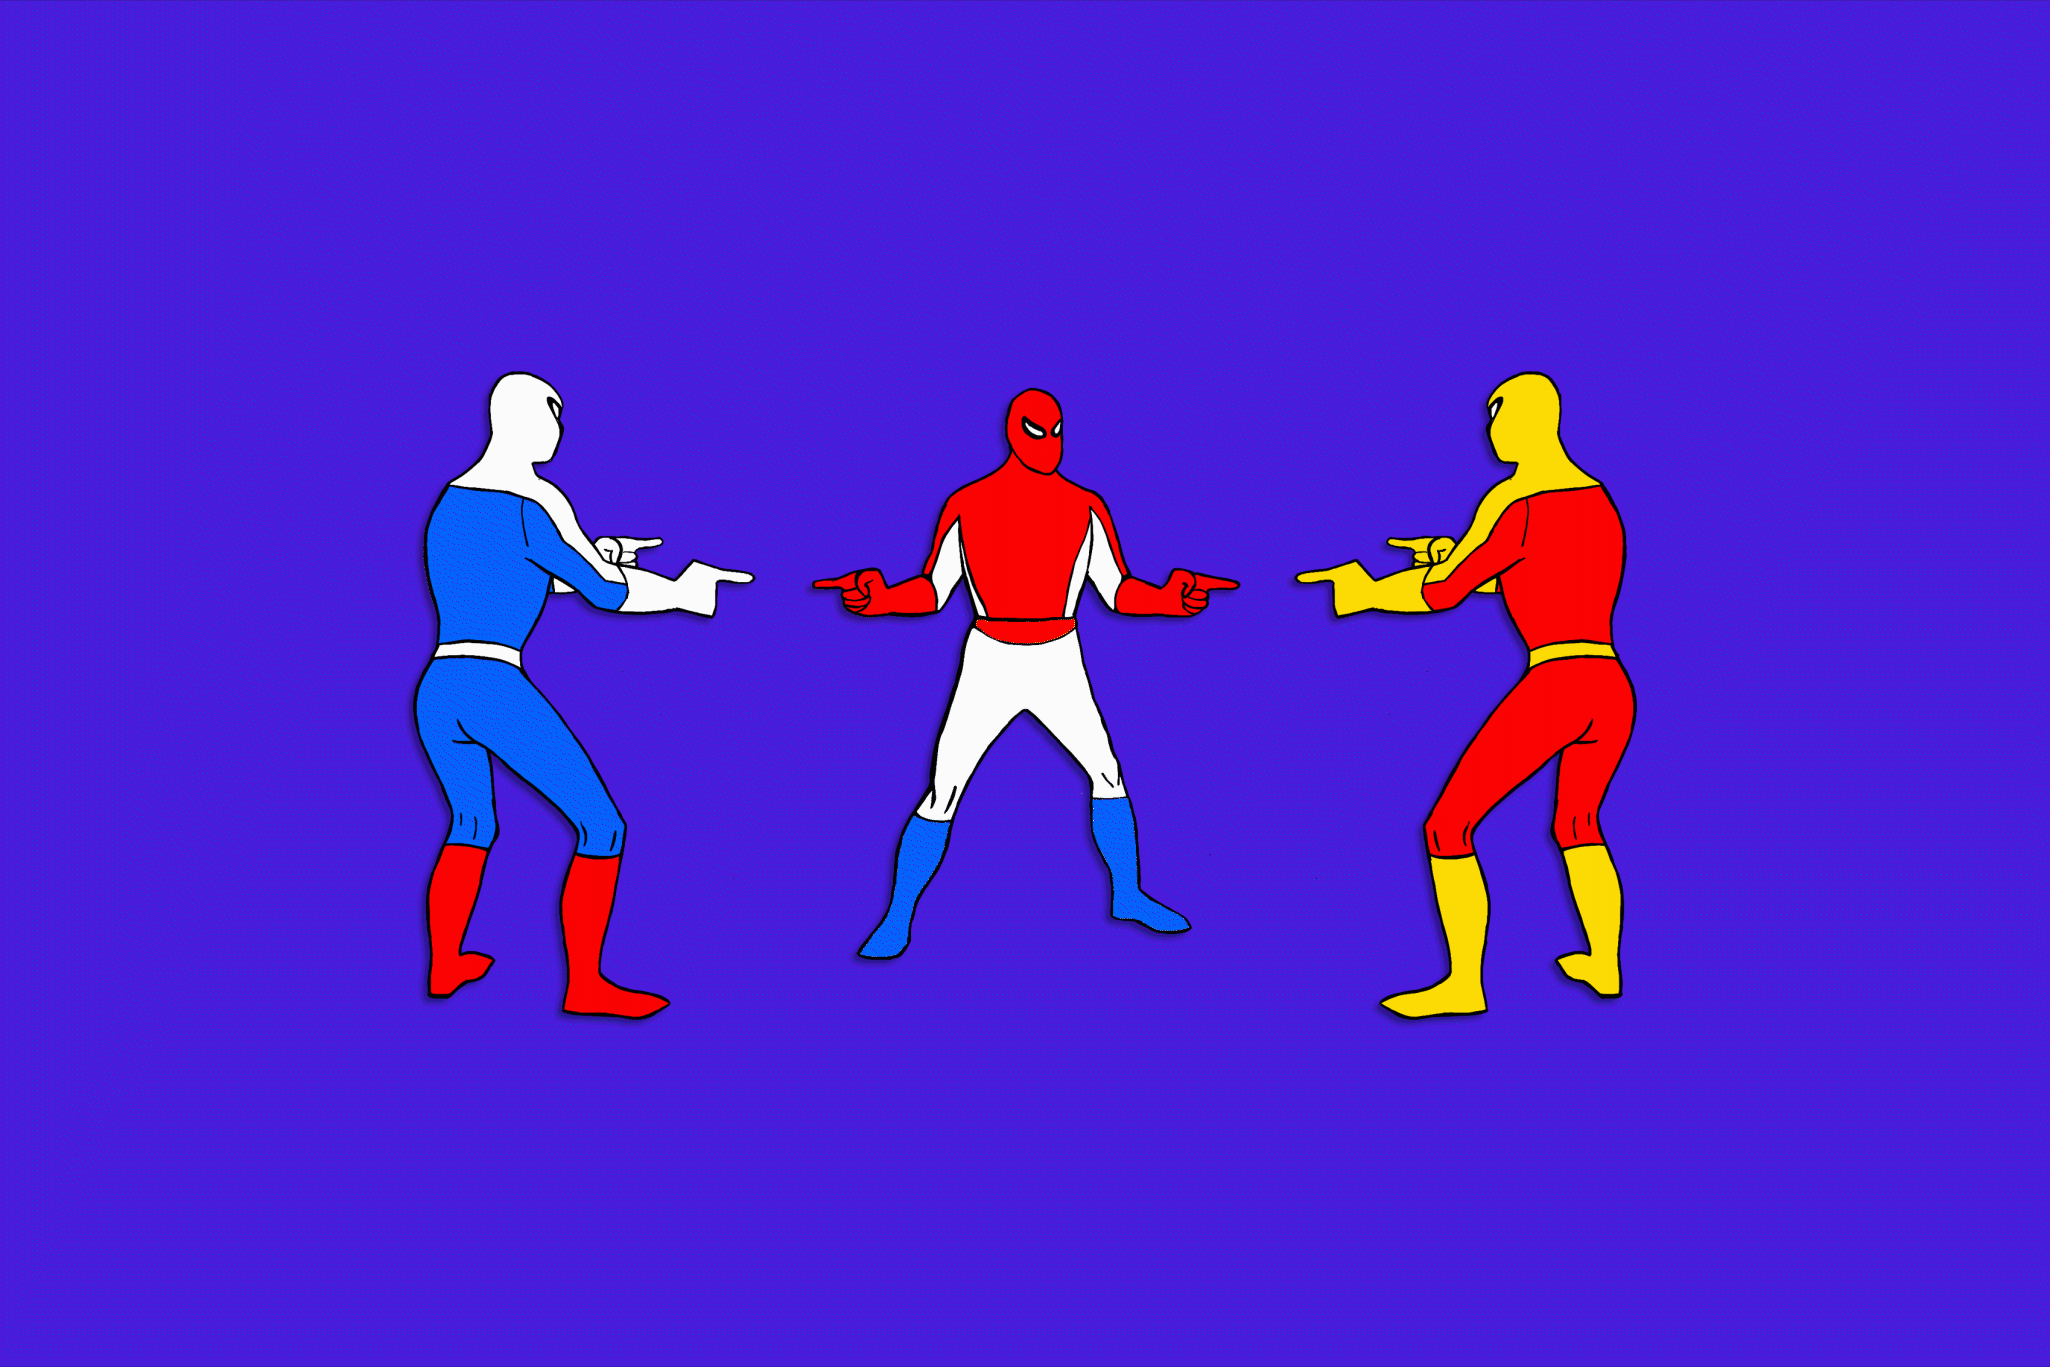 An illustration based on the Spider-Man Pointing at Spider-Man meme where there are three Spider-Man’s pointing fingers at each other. One whose outfit is red, white and blue, another’s outfit is white, blue and red and the third’s outfit is red and yellow.